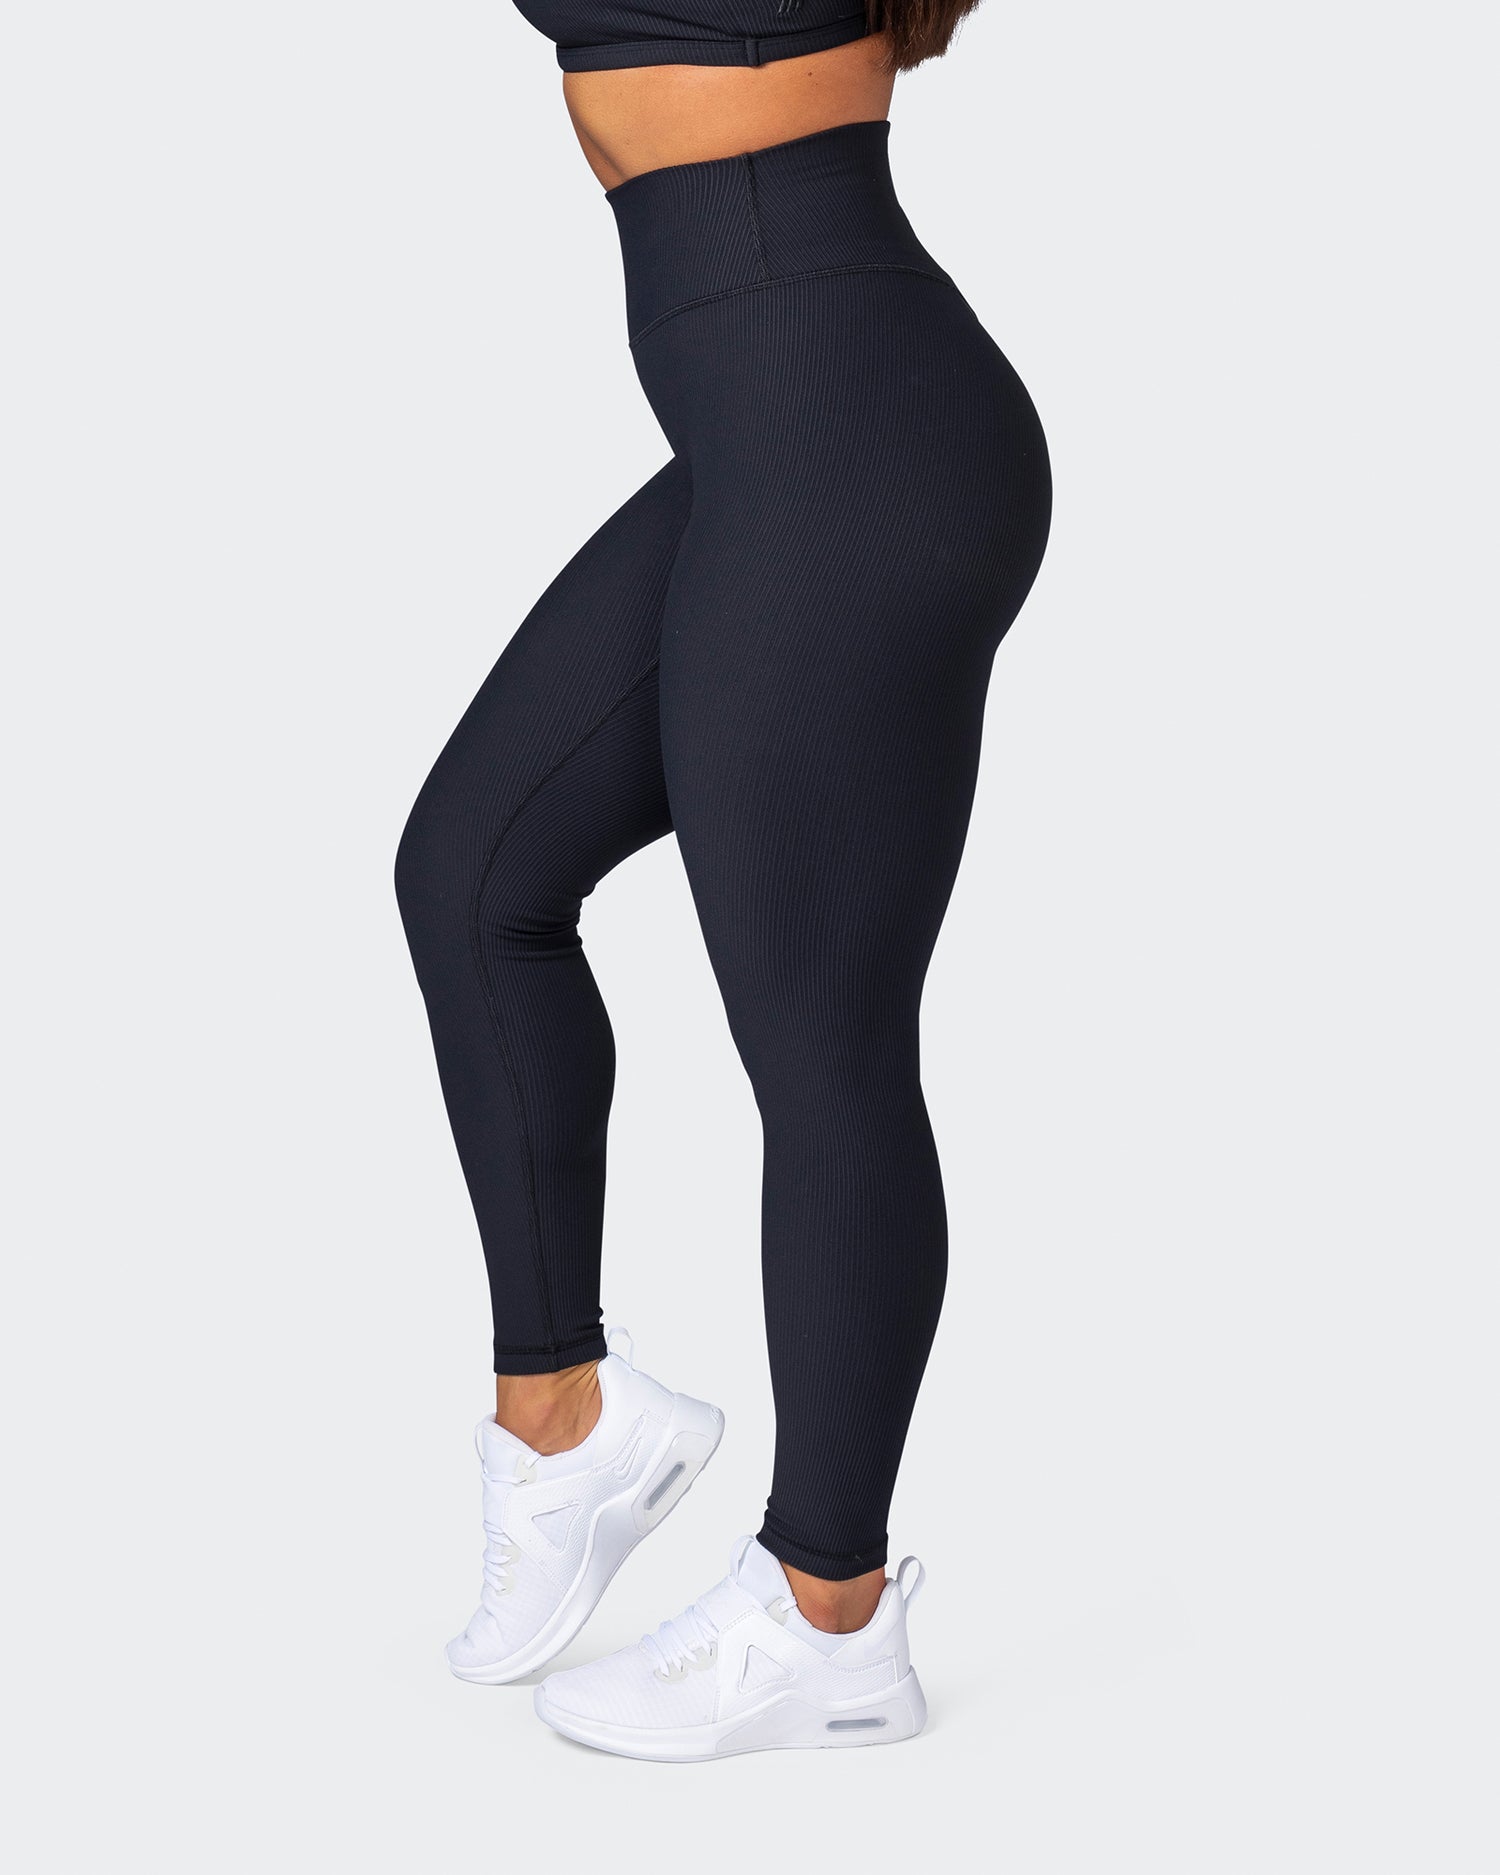 Your perfect black leggings with Muscle Nation